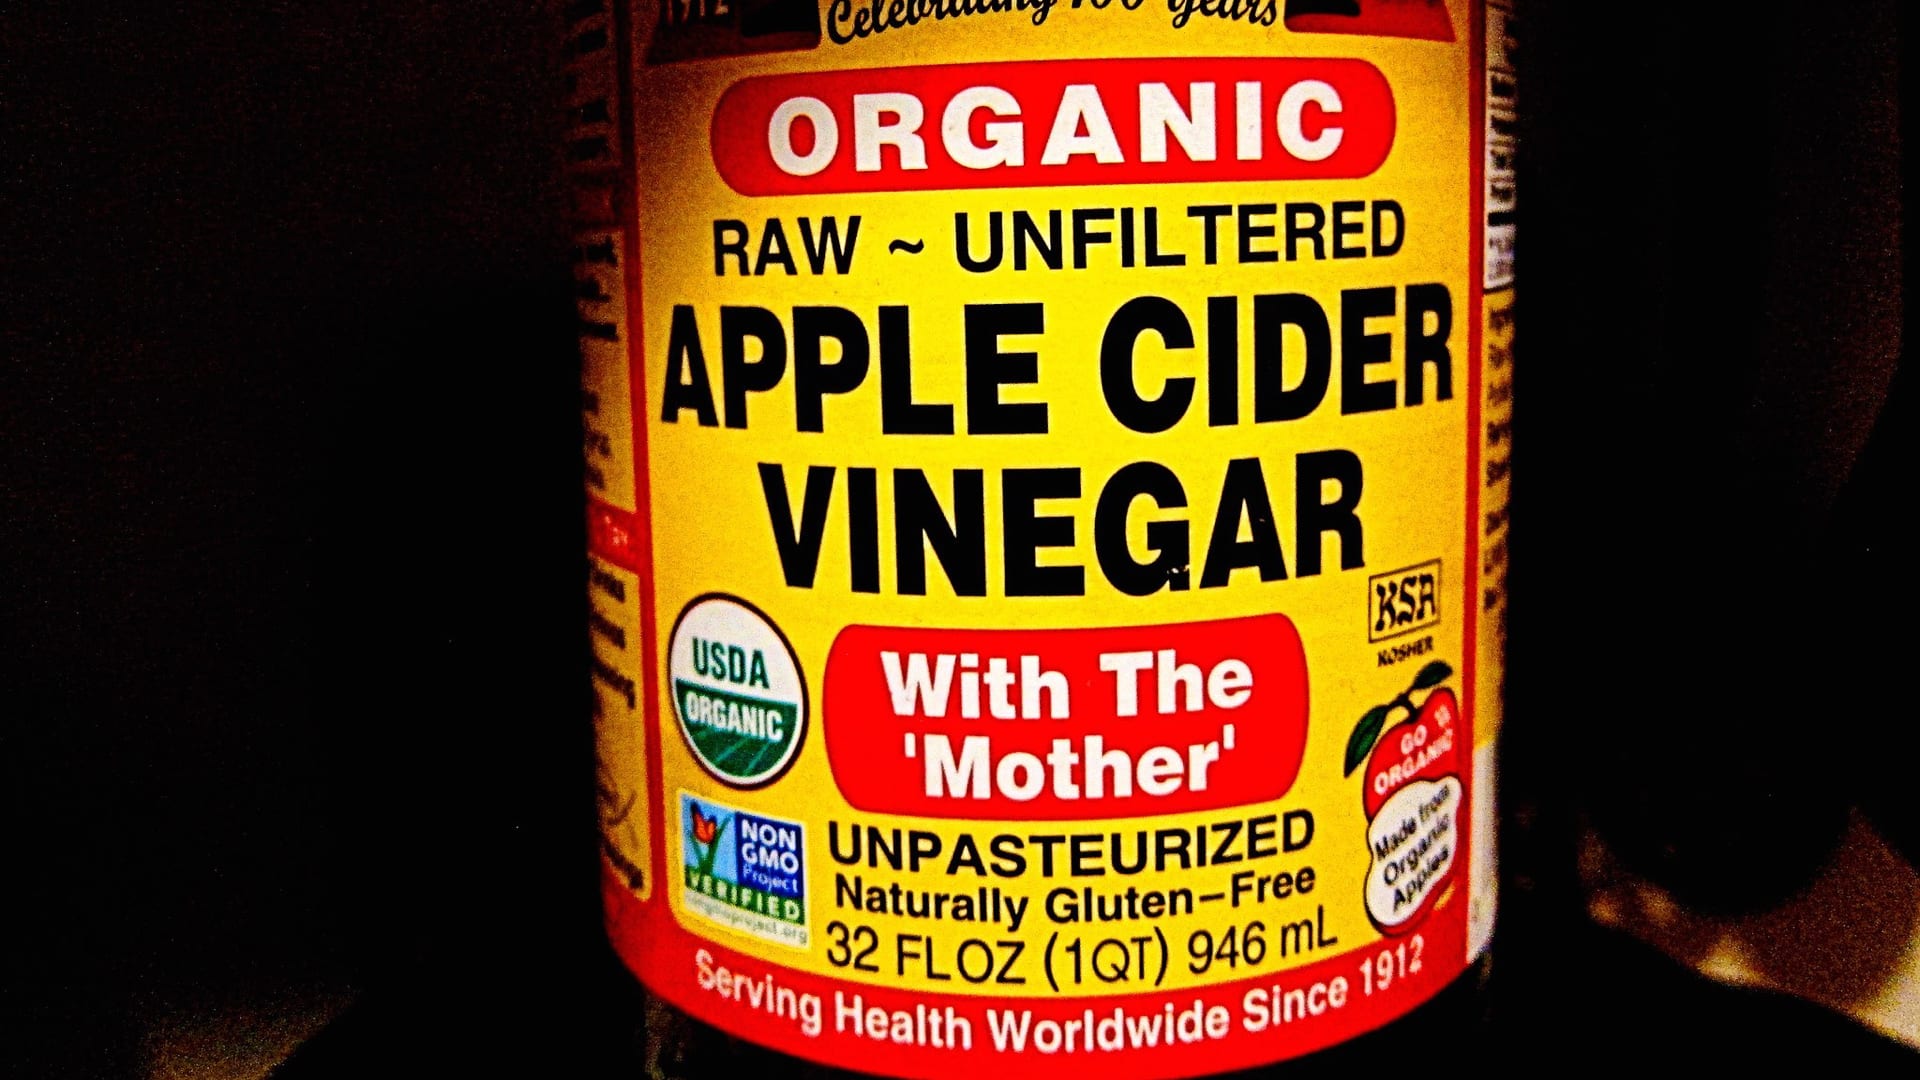 Does Apple Cider Vinegar Help with Weight Loss?